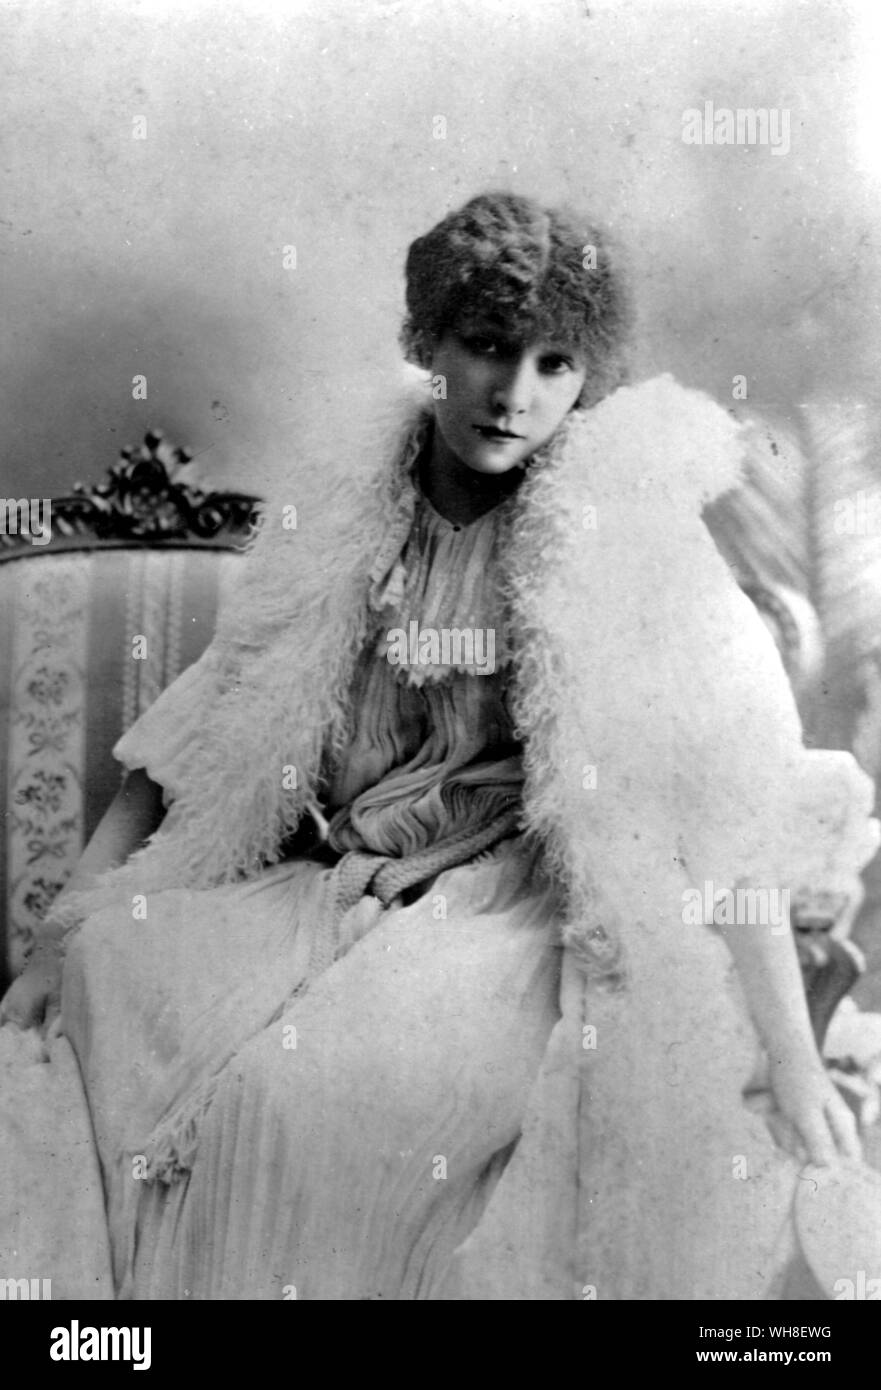 Sarah Bernhardt 1899, stage name of Henriette Rosine Bernard, (1844-1923). French Actress. Bernhardt was also one of the pioneer silent movie actresses. Stock Photo